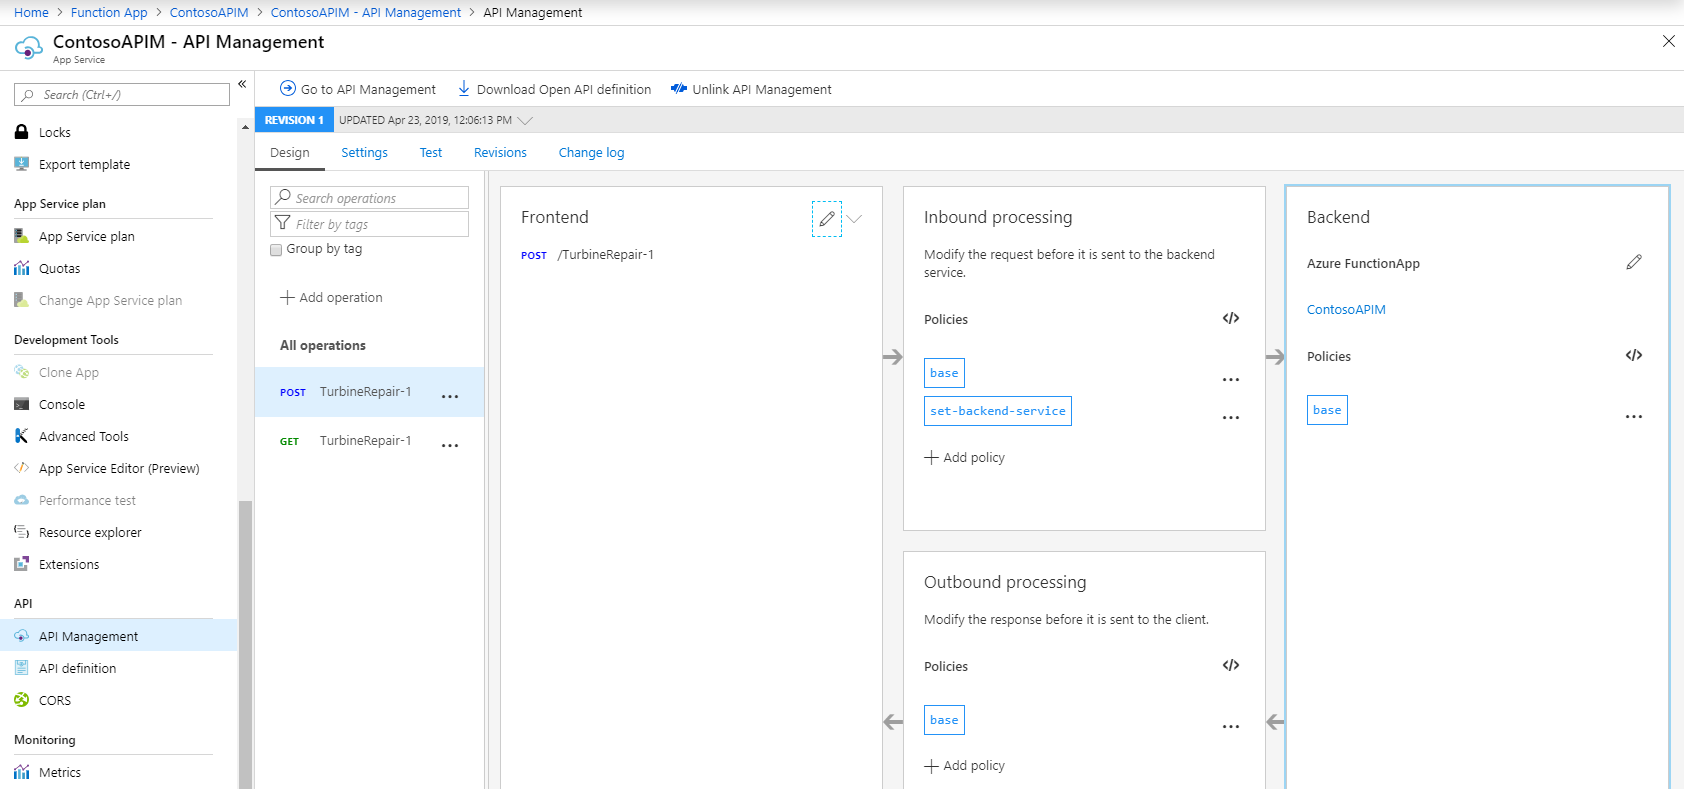 Linking API Management dashboard to Function Apps